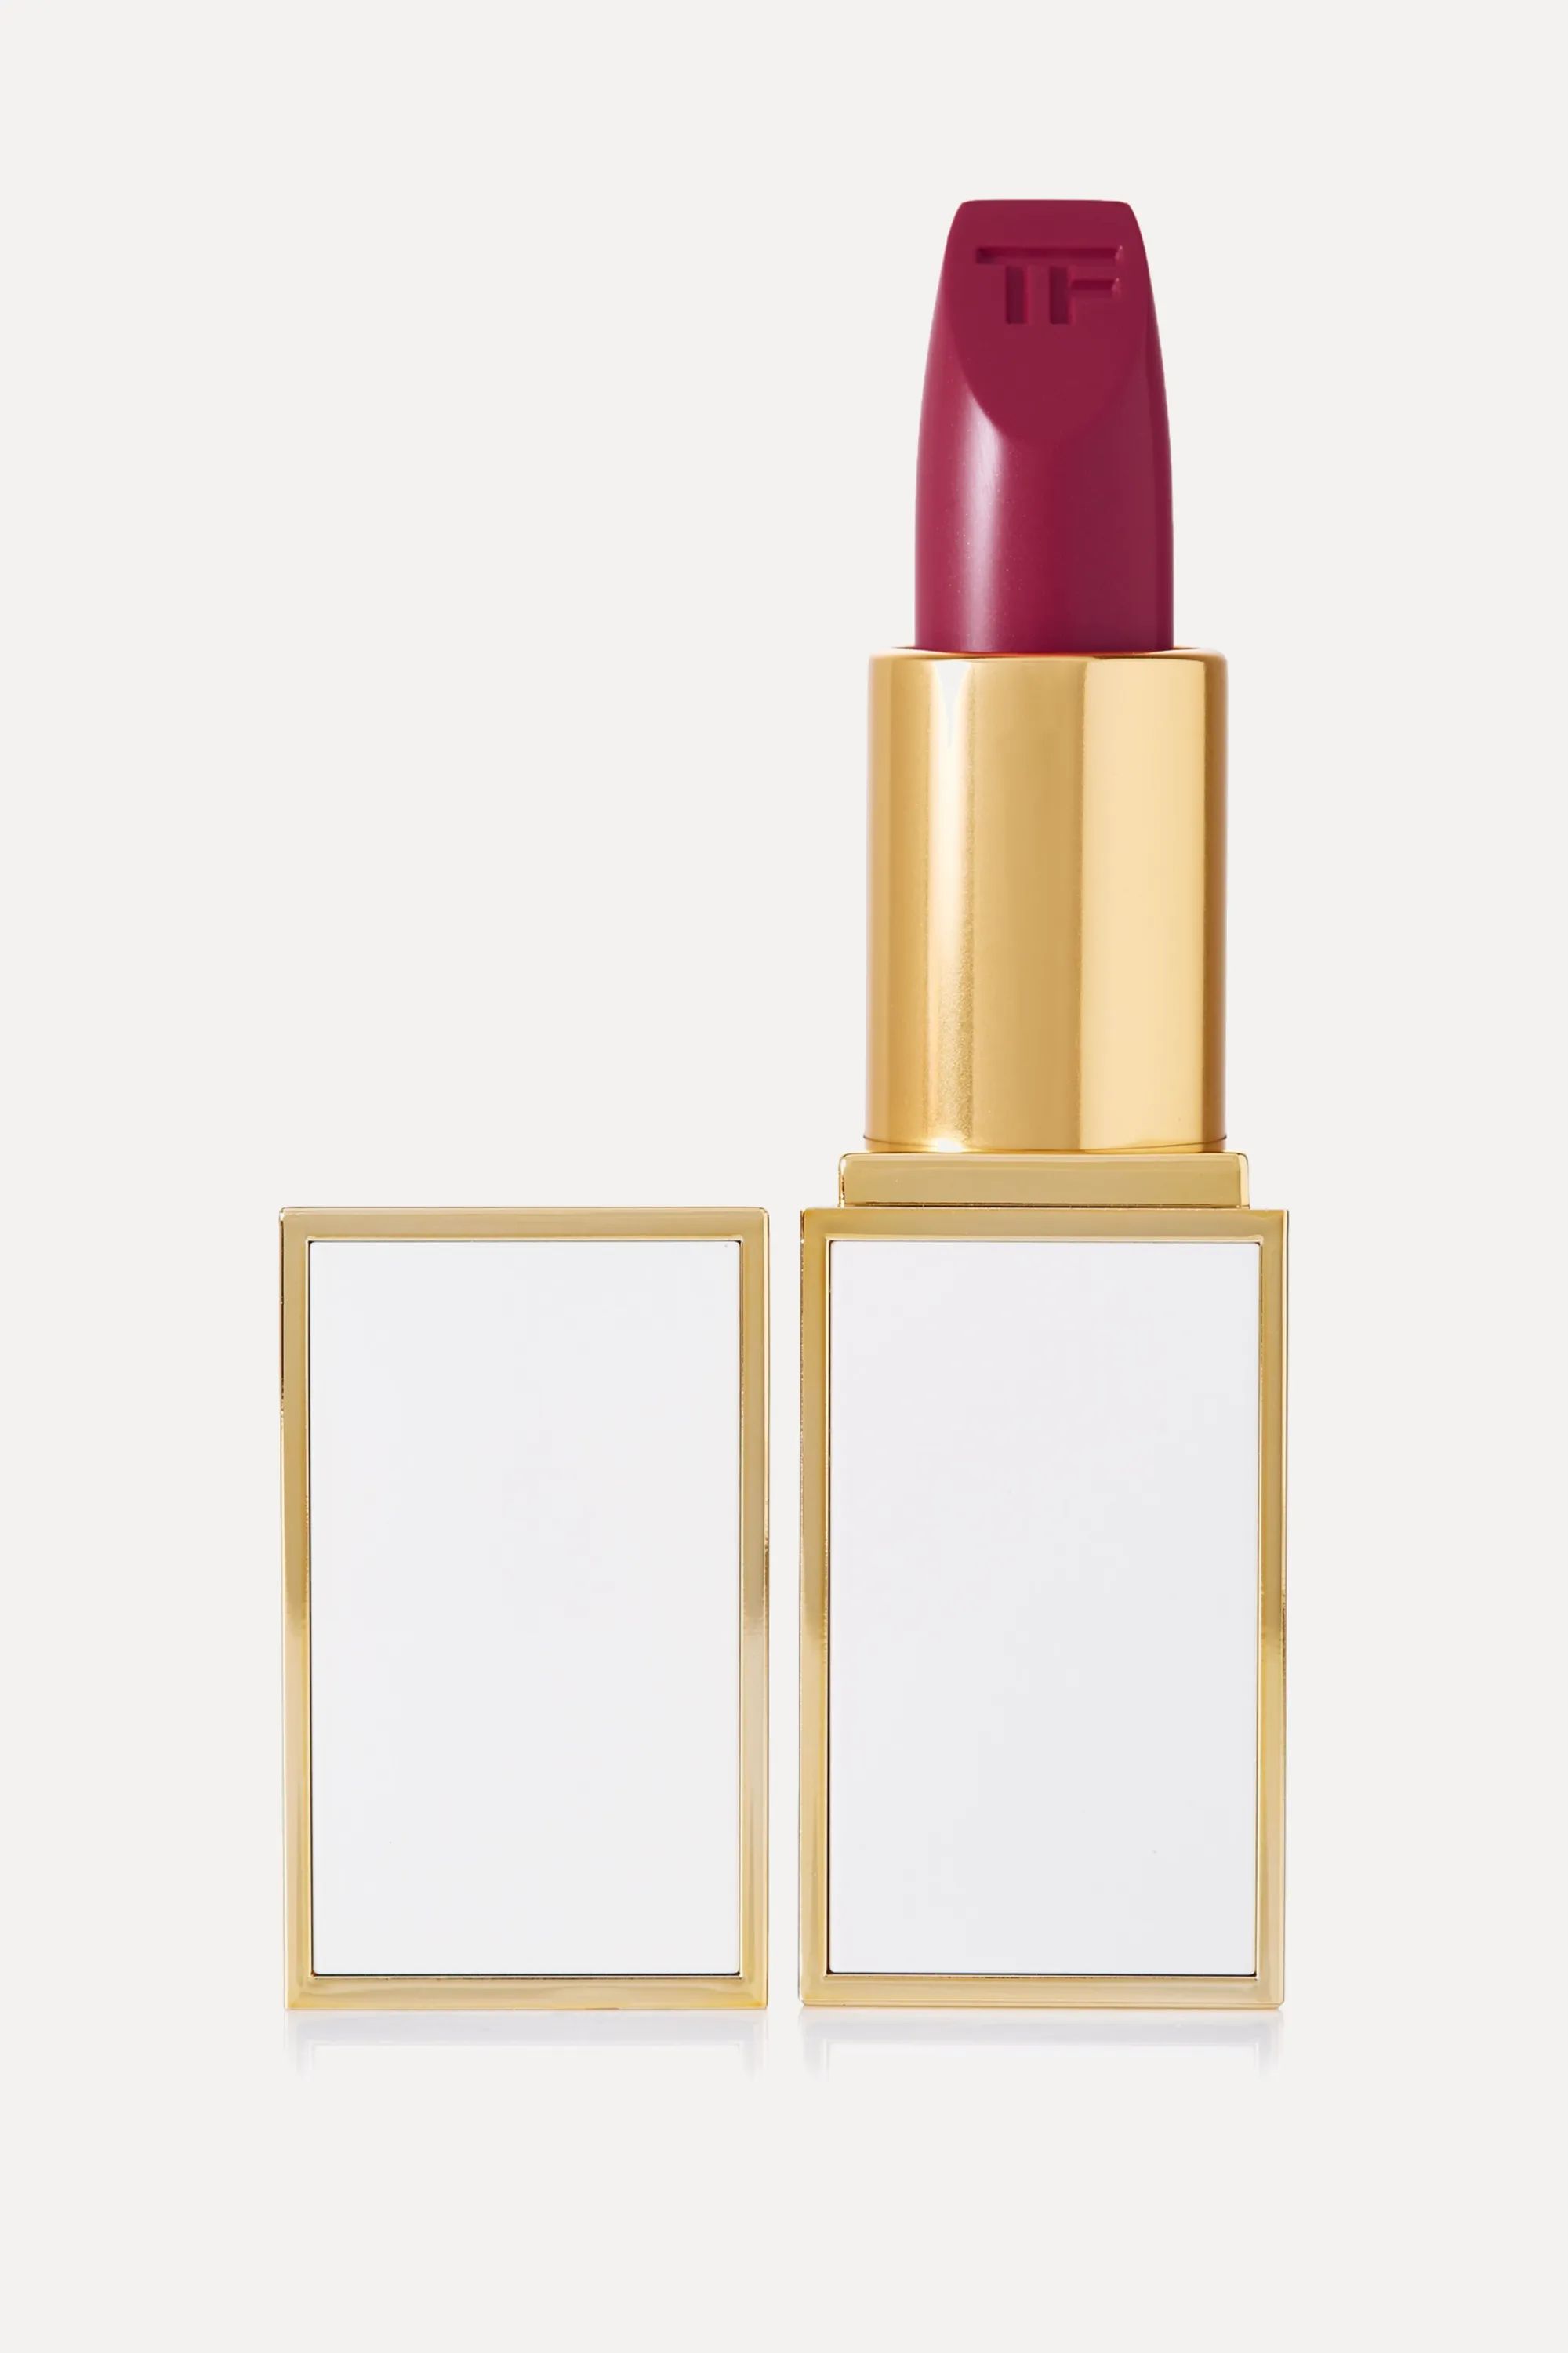 TOM FORD BEAUTYUltra-Rich Lip Color - Purple Noon | NET-A-PORTER (US)